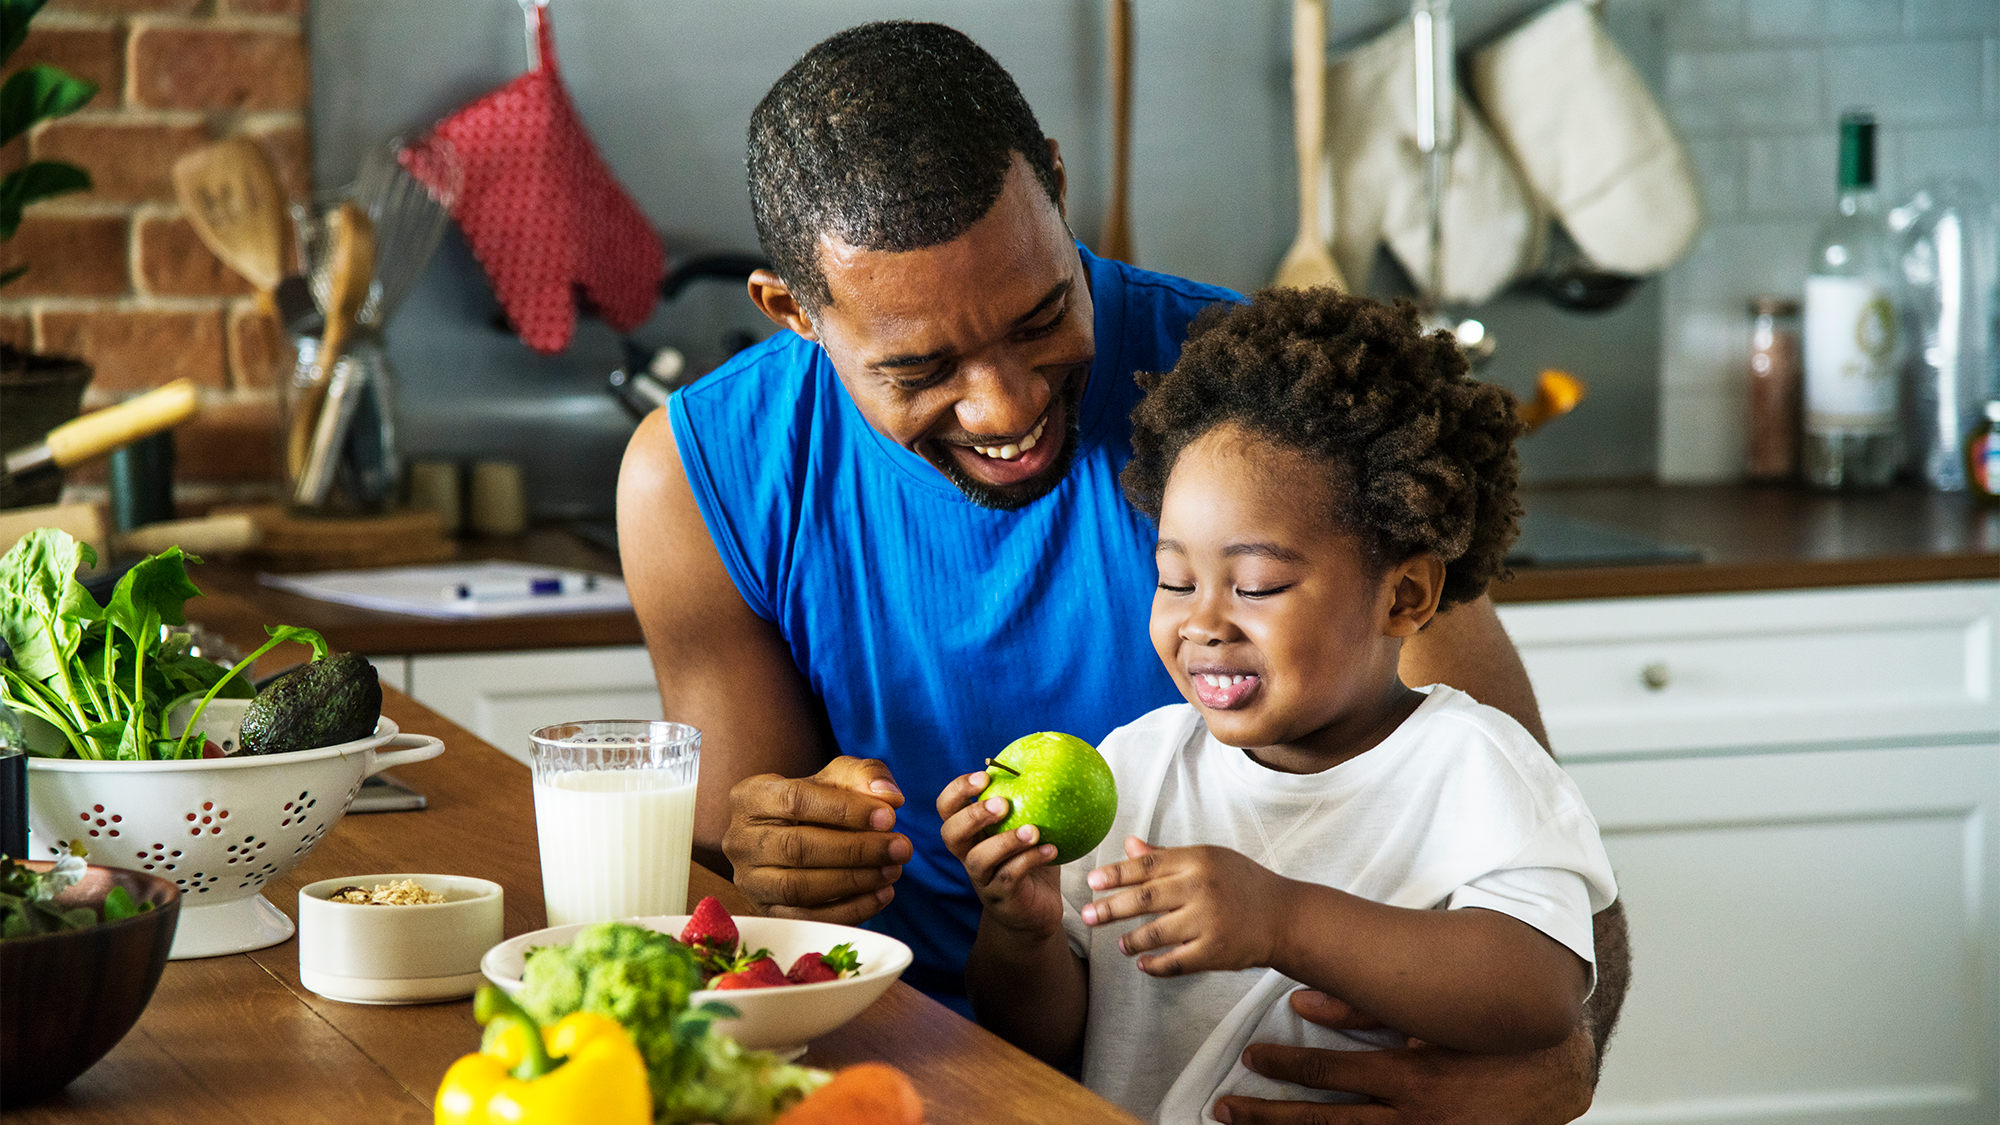 A man and his son share healthy foods in the kitchen